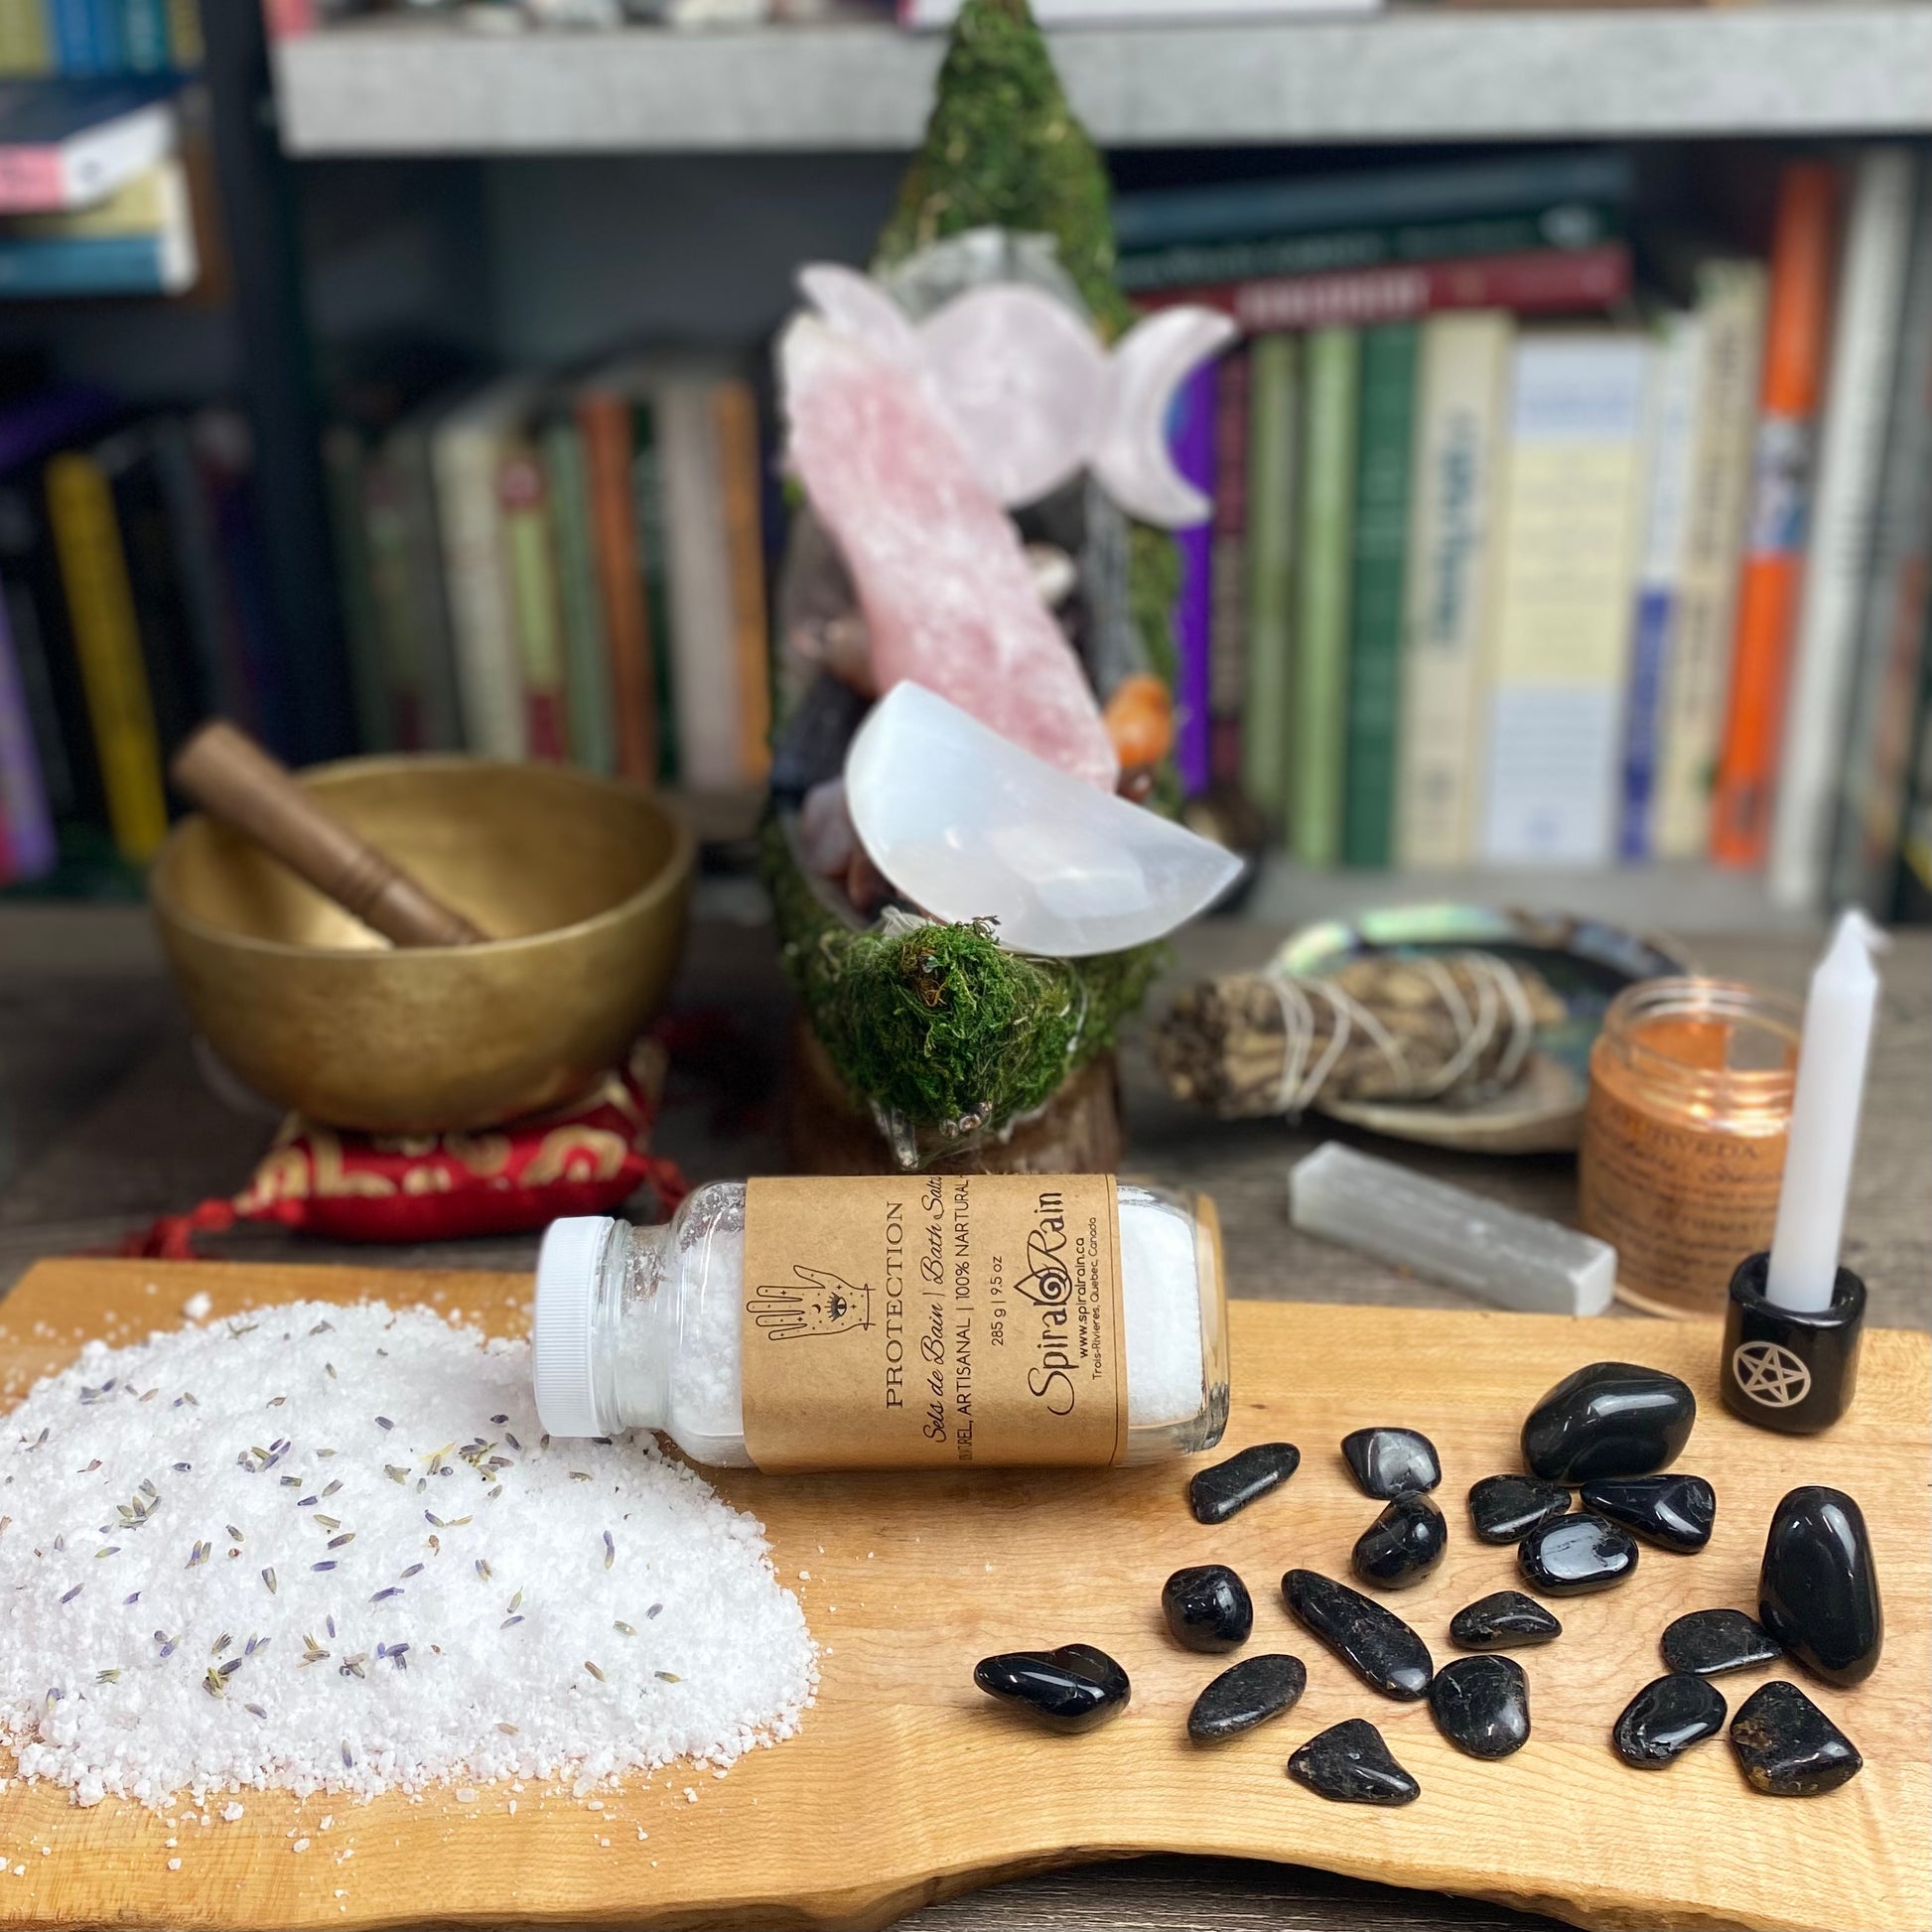 Protection bath salts at $20 only from Spiral Rain